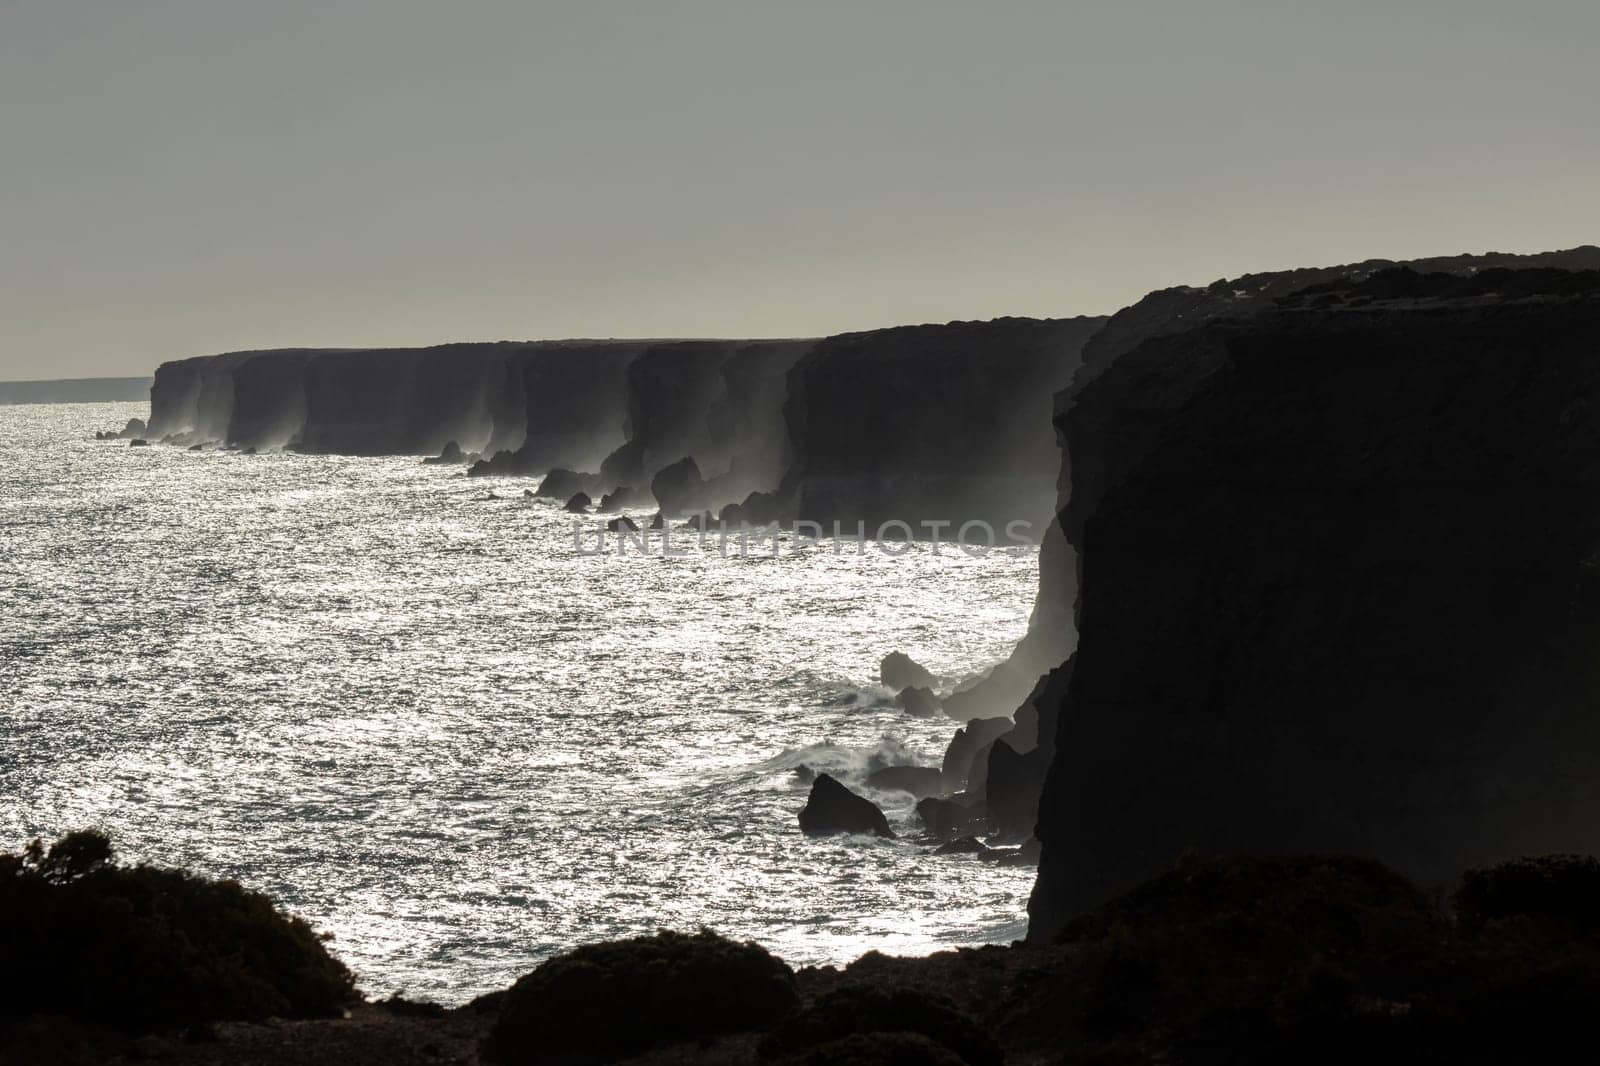 Moody and beautiful cinematic photo of the famous Bunda cliffs in the Nullarbor, silhouetted at sunset to create a monochromatic look, South Australia.